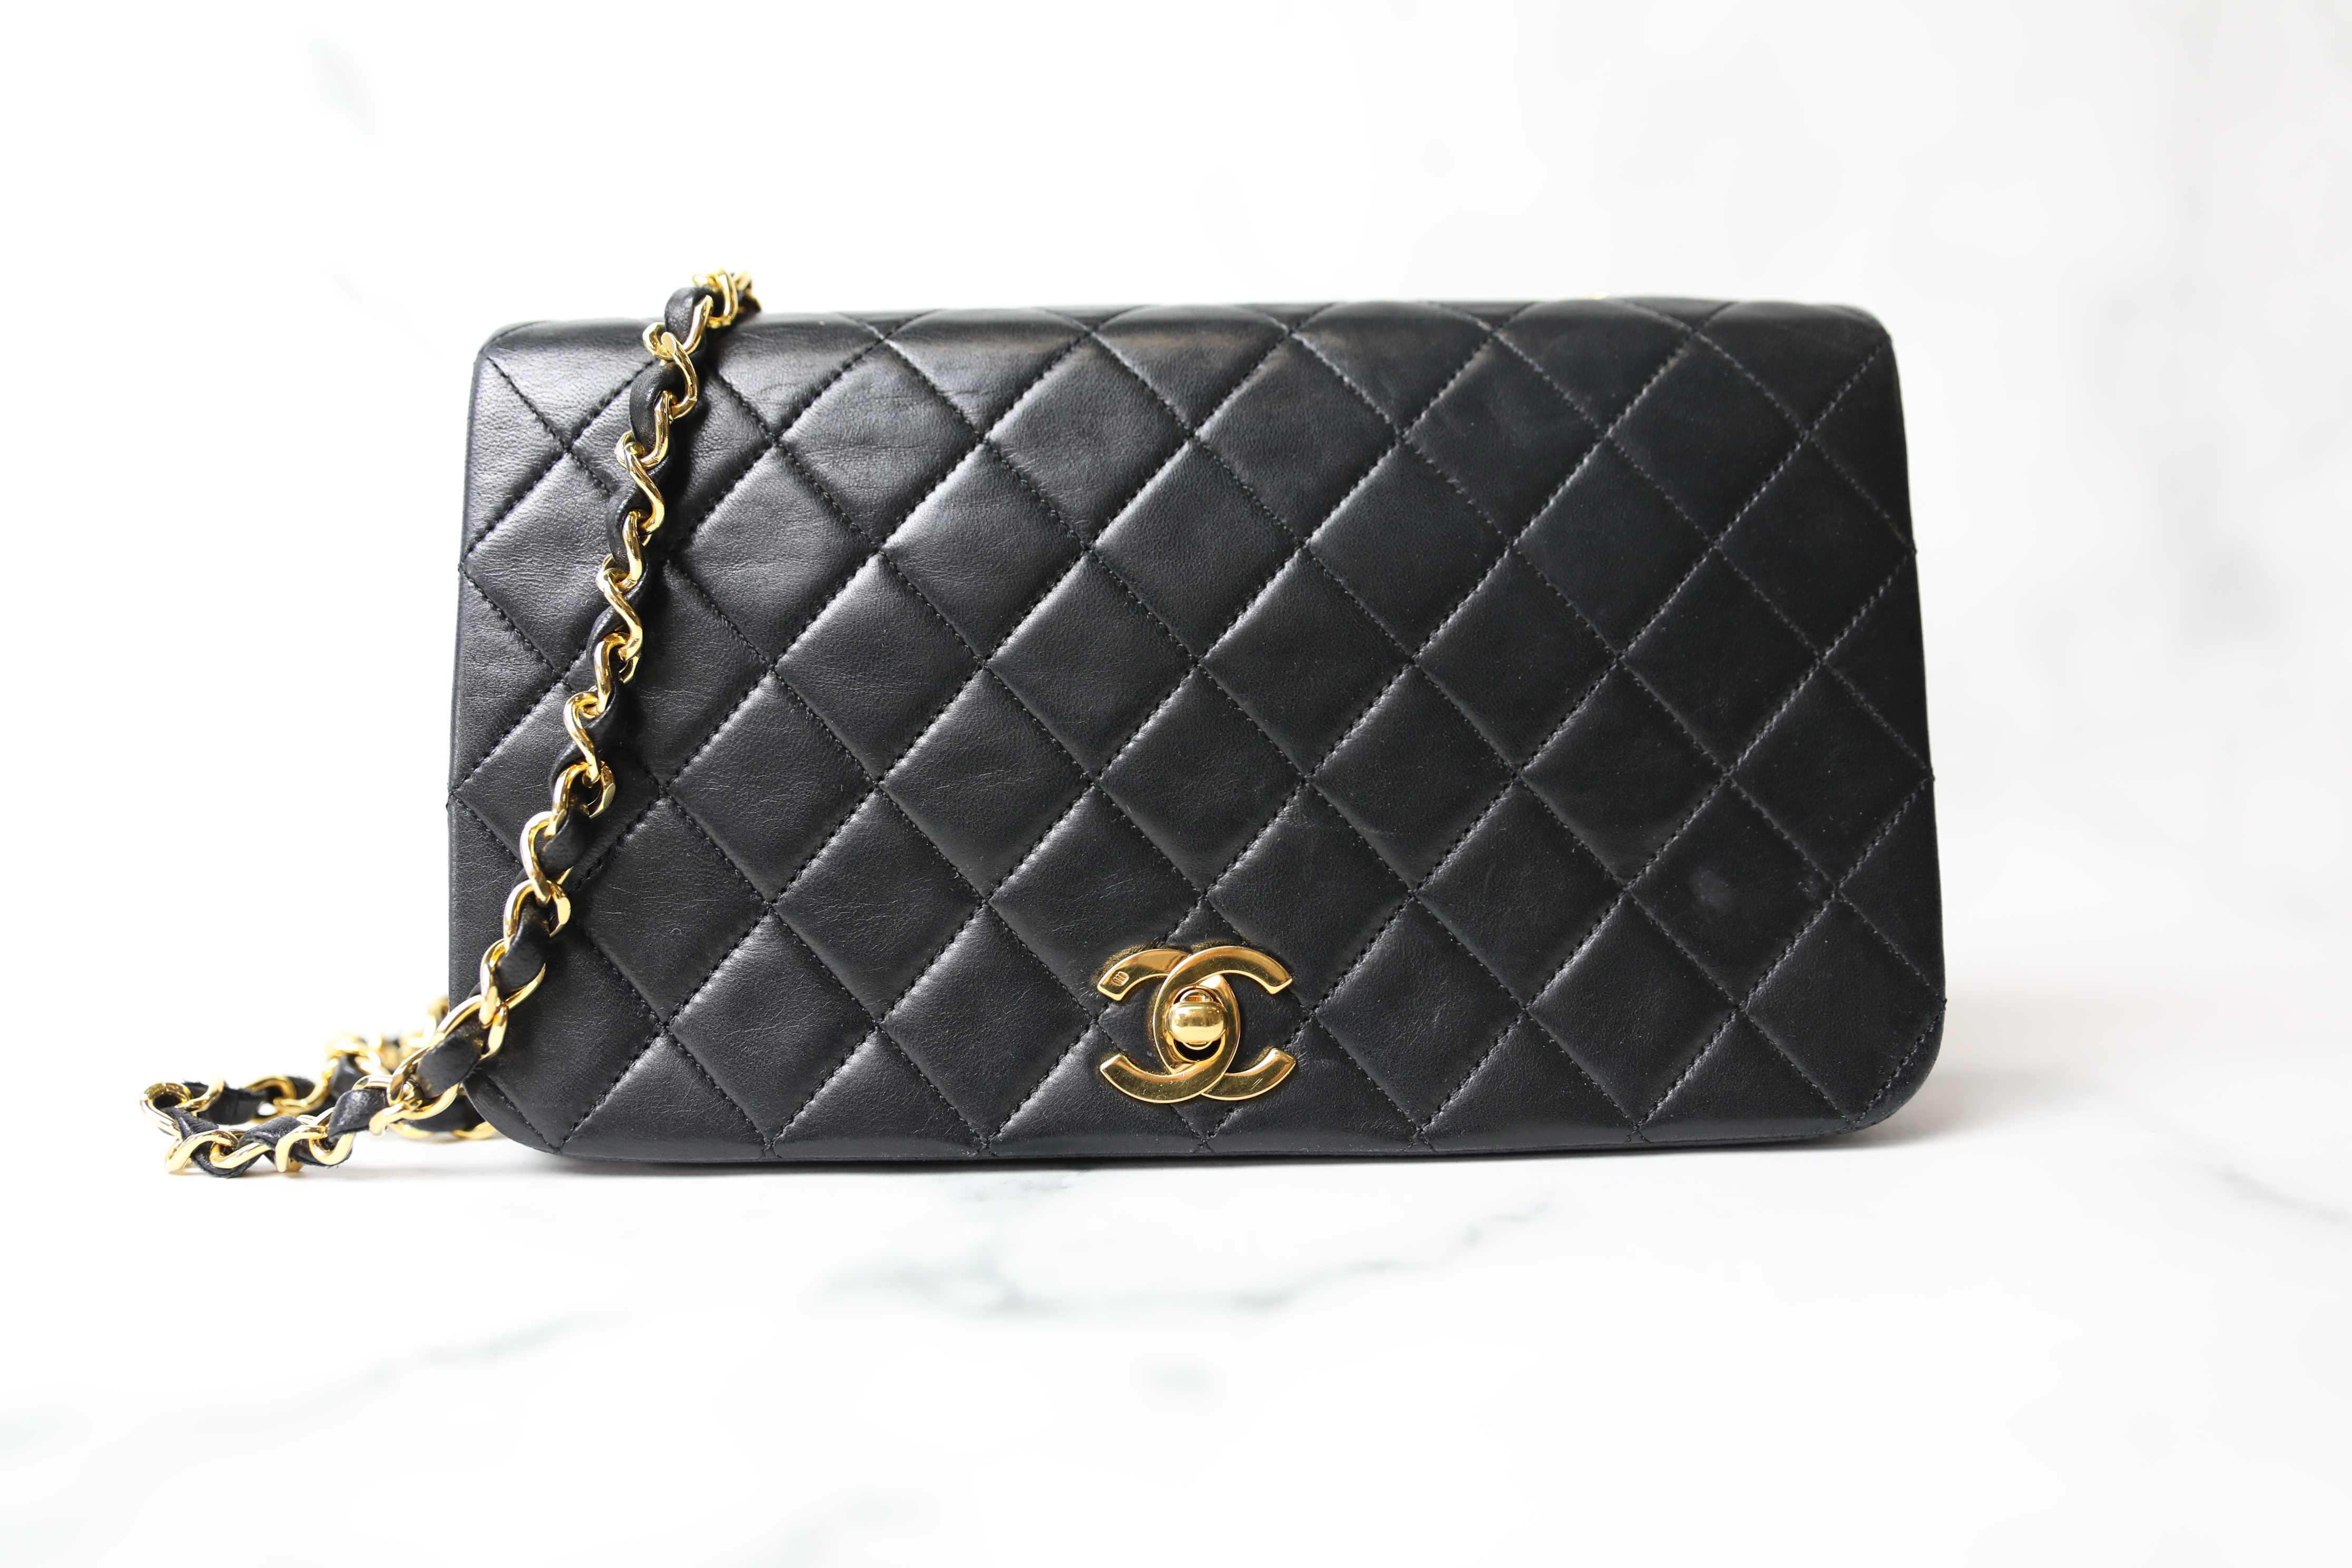 Chanel Vintage Flap, Golden Floral Print with Gold Hardware, Preowned in  Dustbag WA001 - Julia Rose Boston